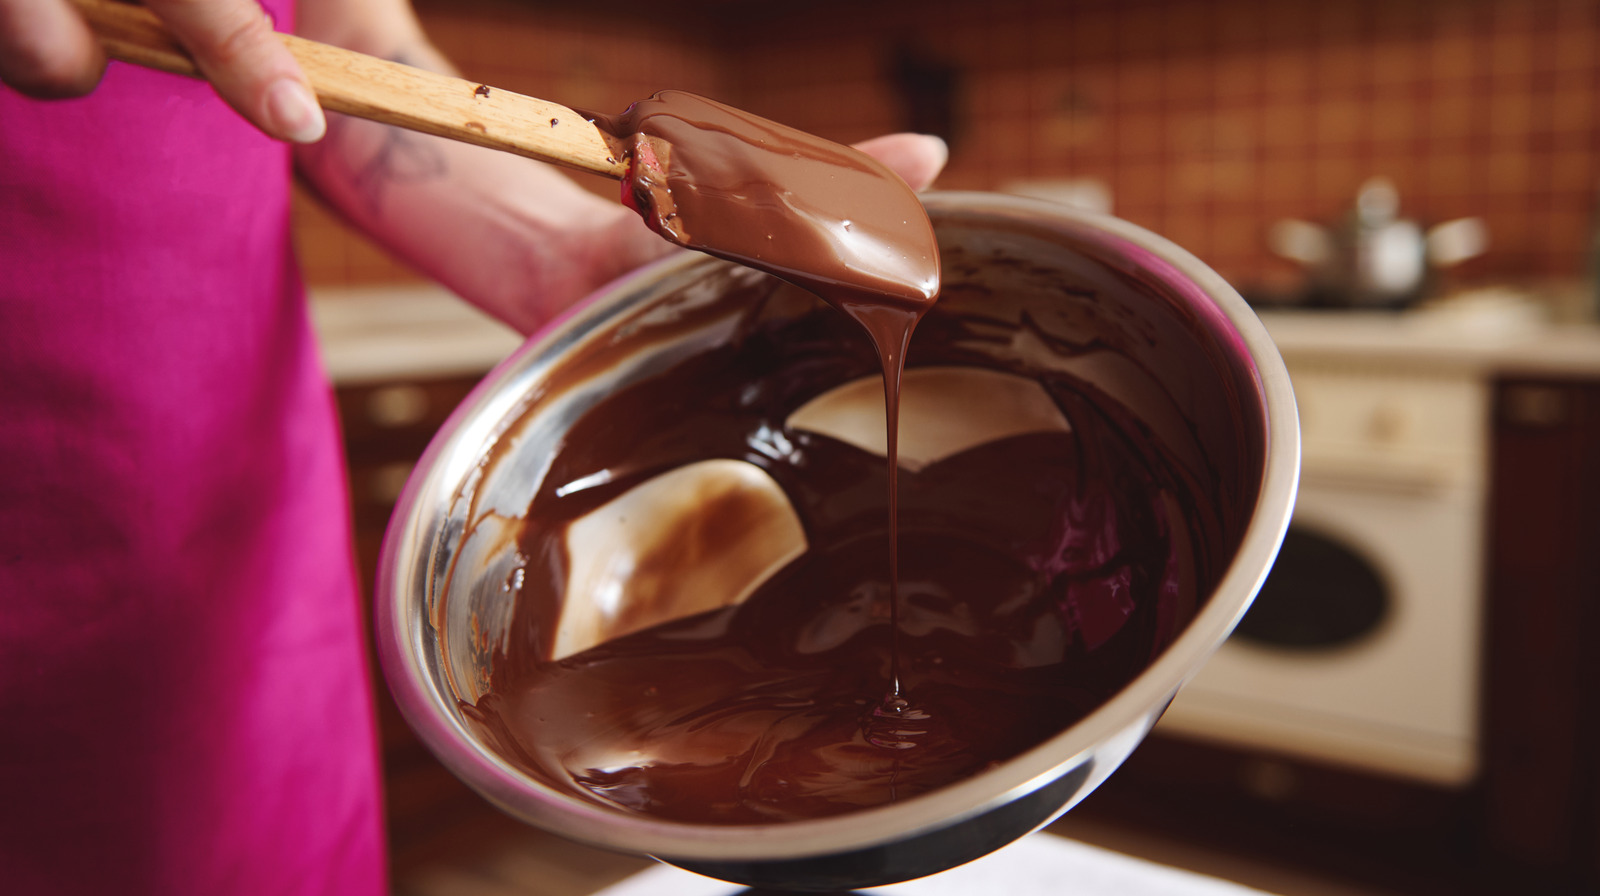 https://www.foodrepublic.com/img/gallery/how-to-easily-temper-chocolate-for-the-uninitiated/l-intro-1692305690.jpg